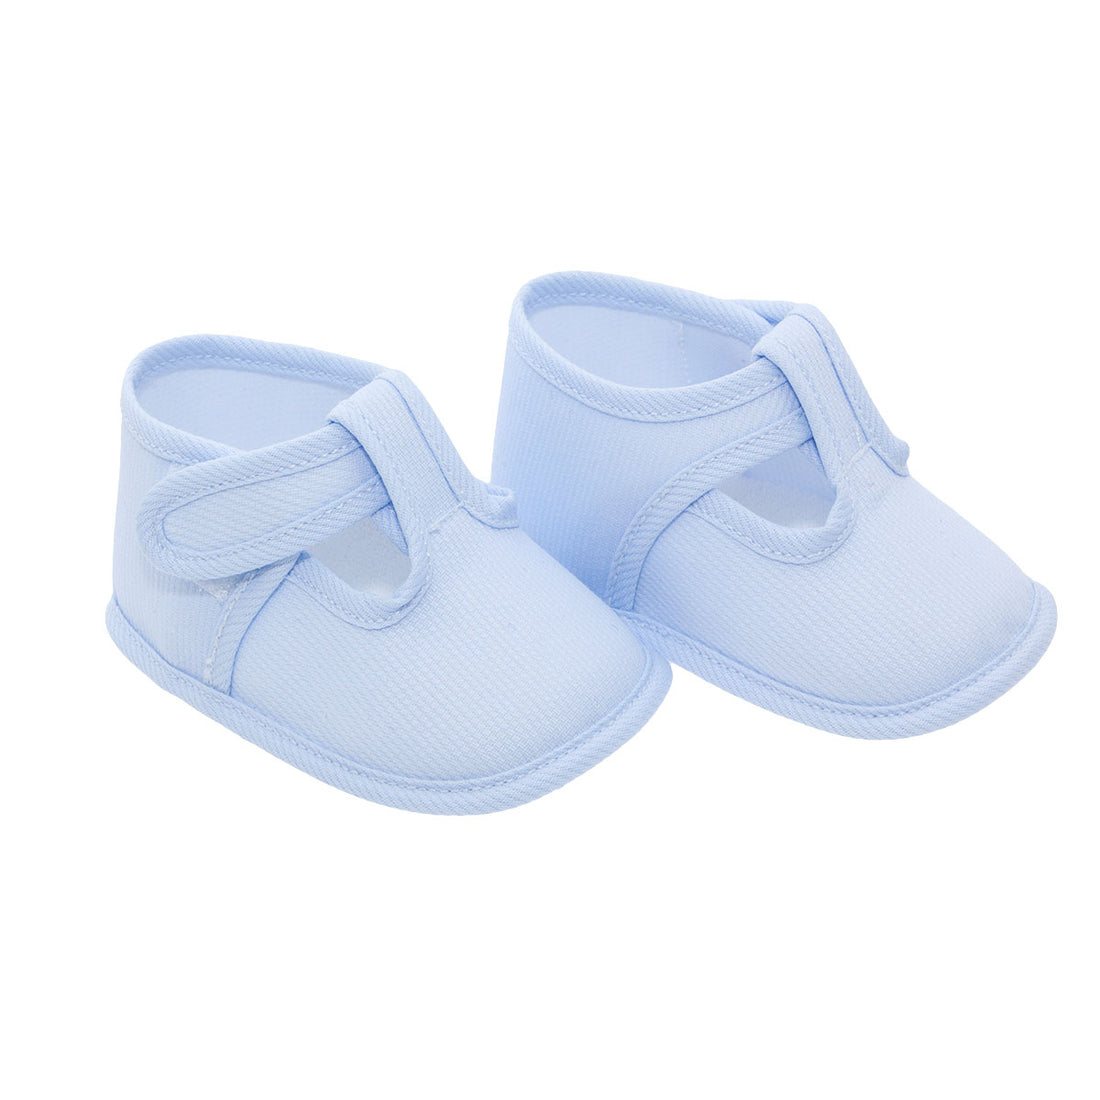 r&j-cambrass-sa-summer-baby-shoes-113-blue- (1)